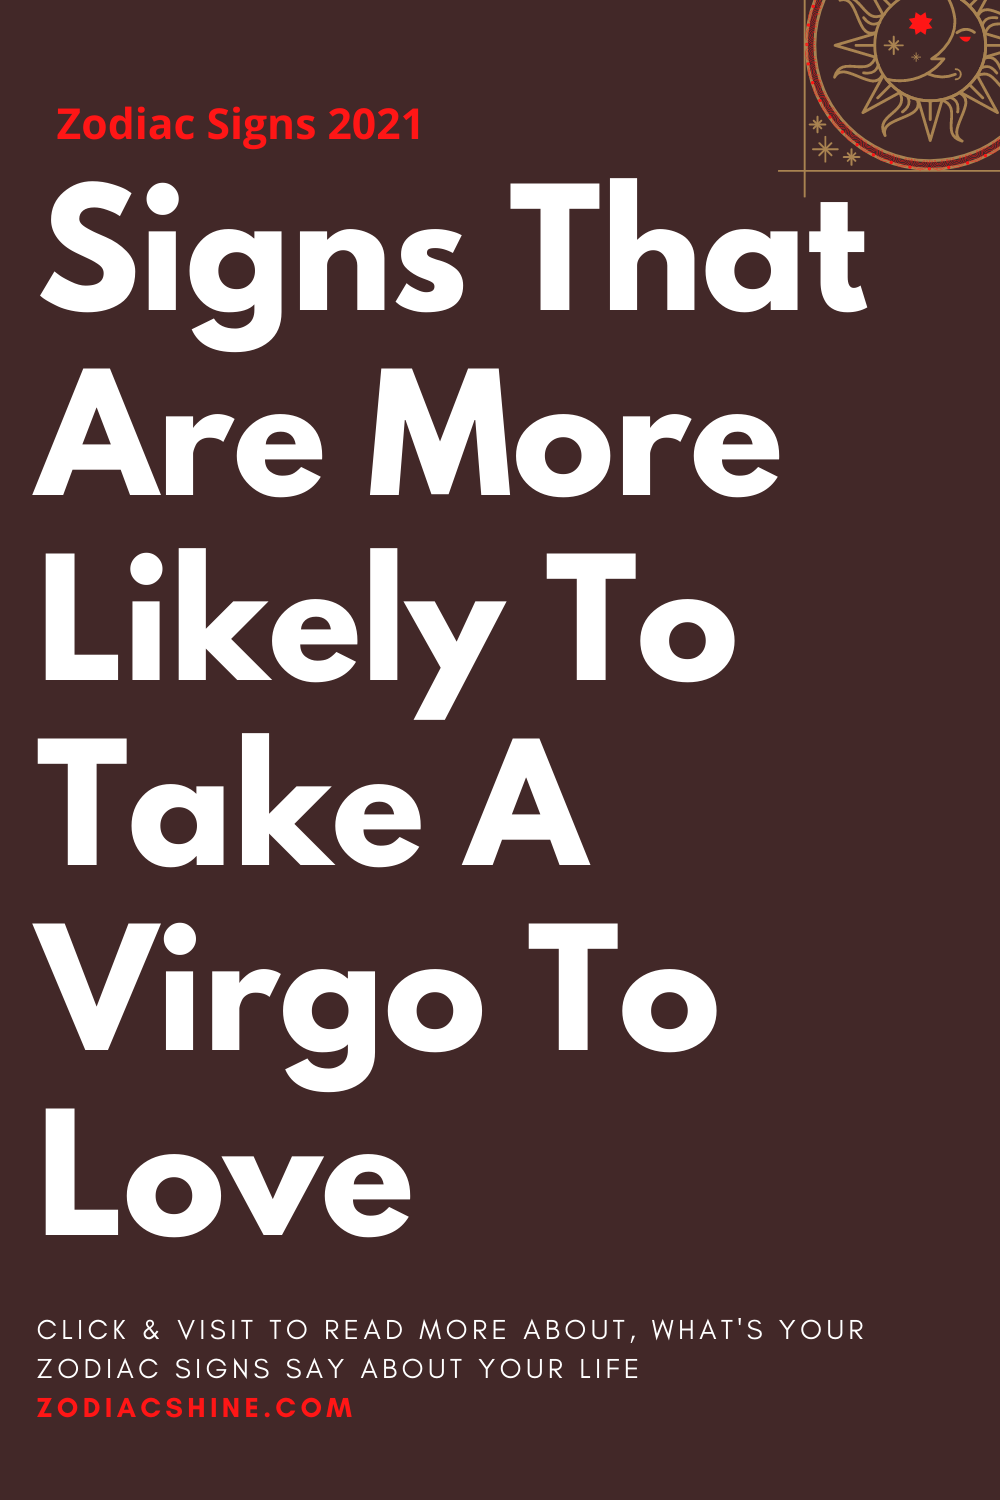 Signs That Are More Likely To Take A Virgo To Love